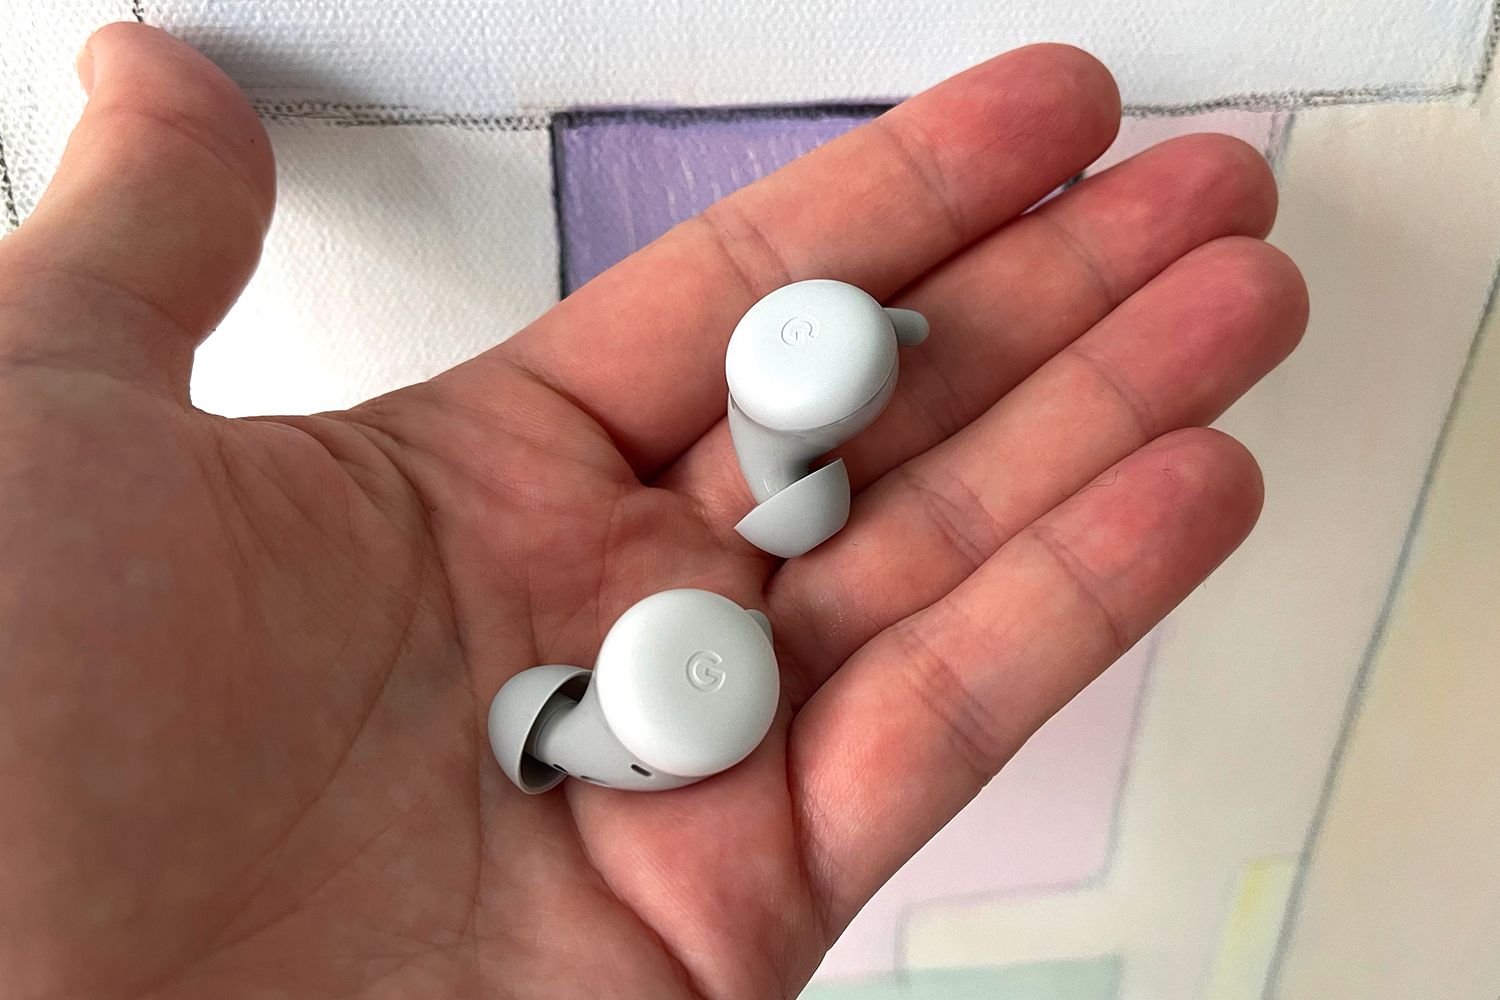 Pixel Buds A-Series: Rich sound with an iconic design